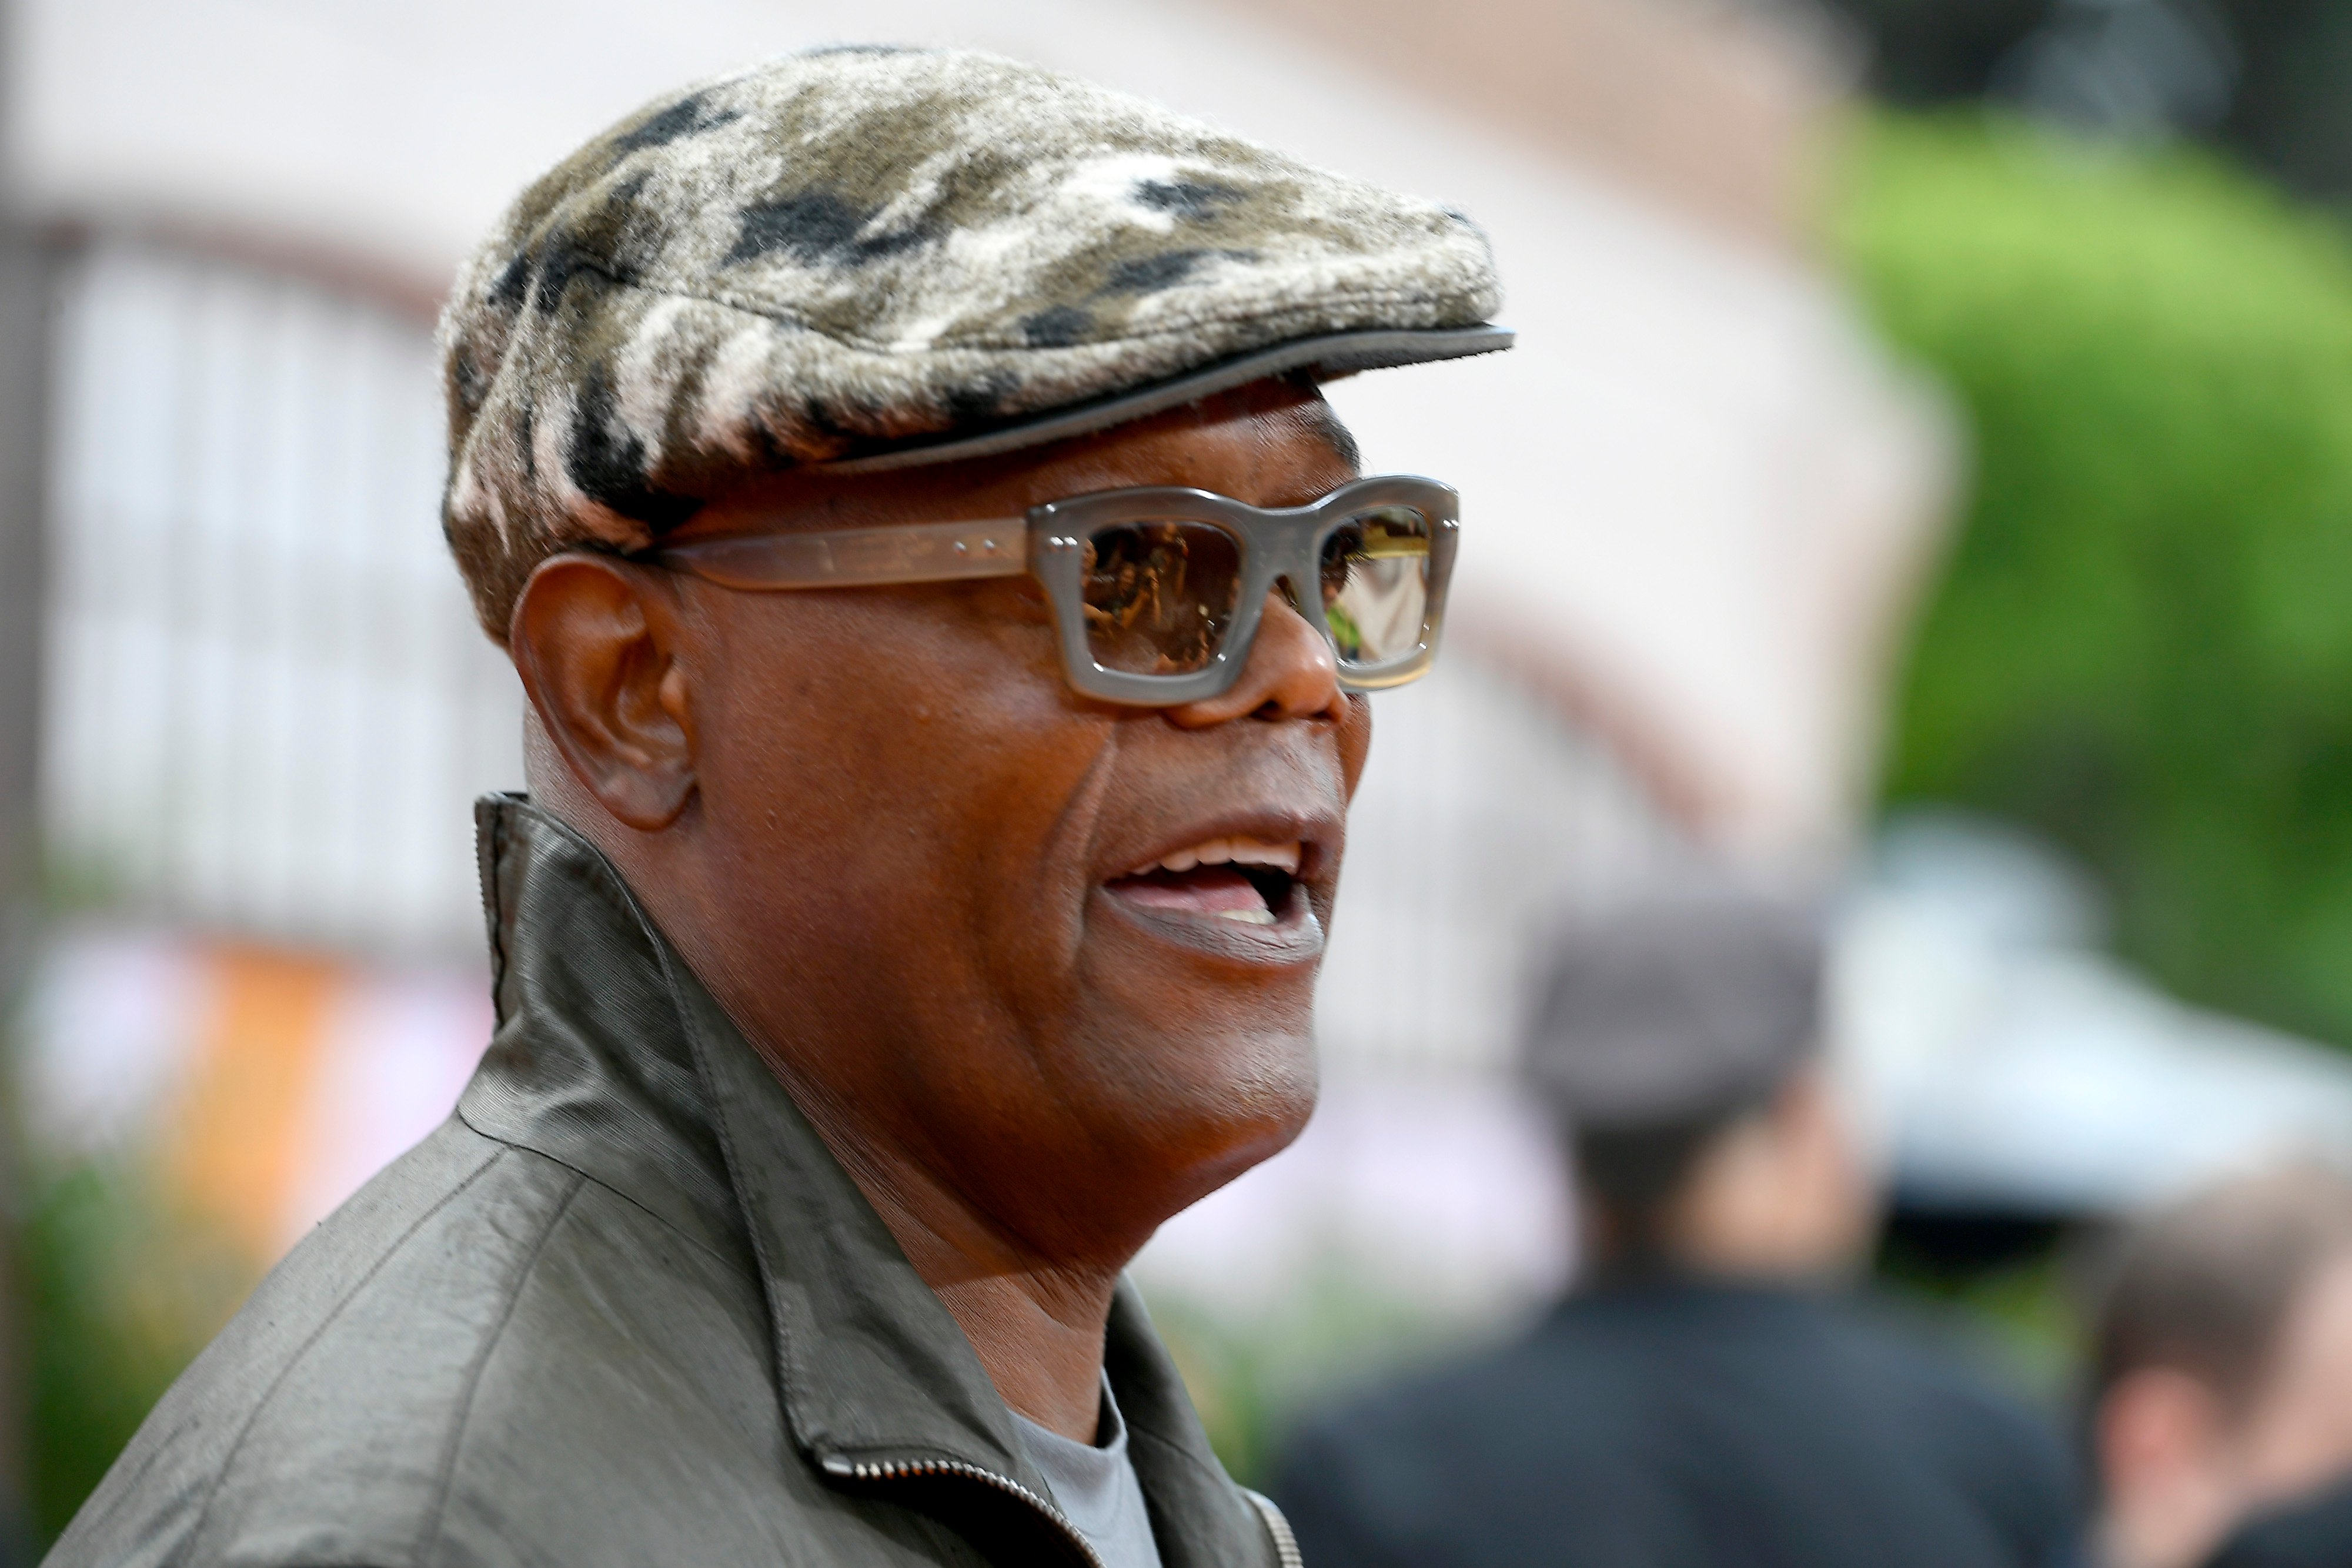 Samuel L. Jackson, star of Quentin Tarantino's Pulp Fiction, attends the premiere of Netflix's Dolemite is My Name 